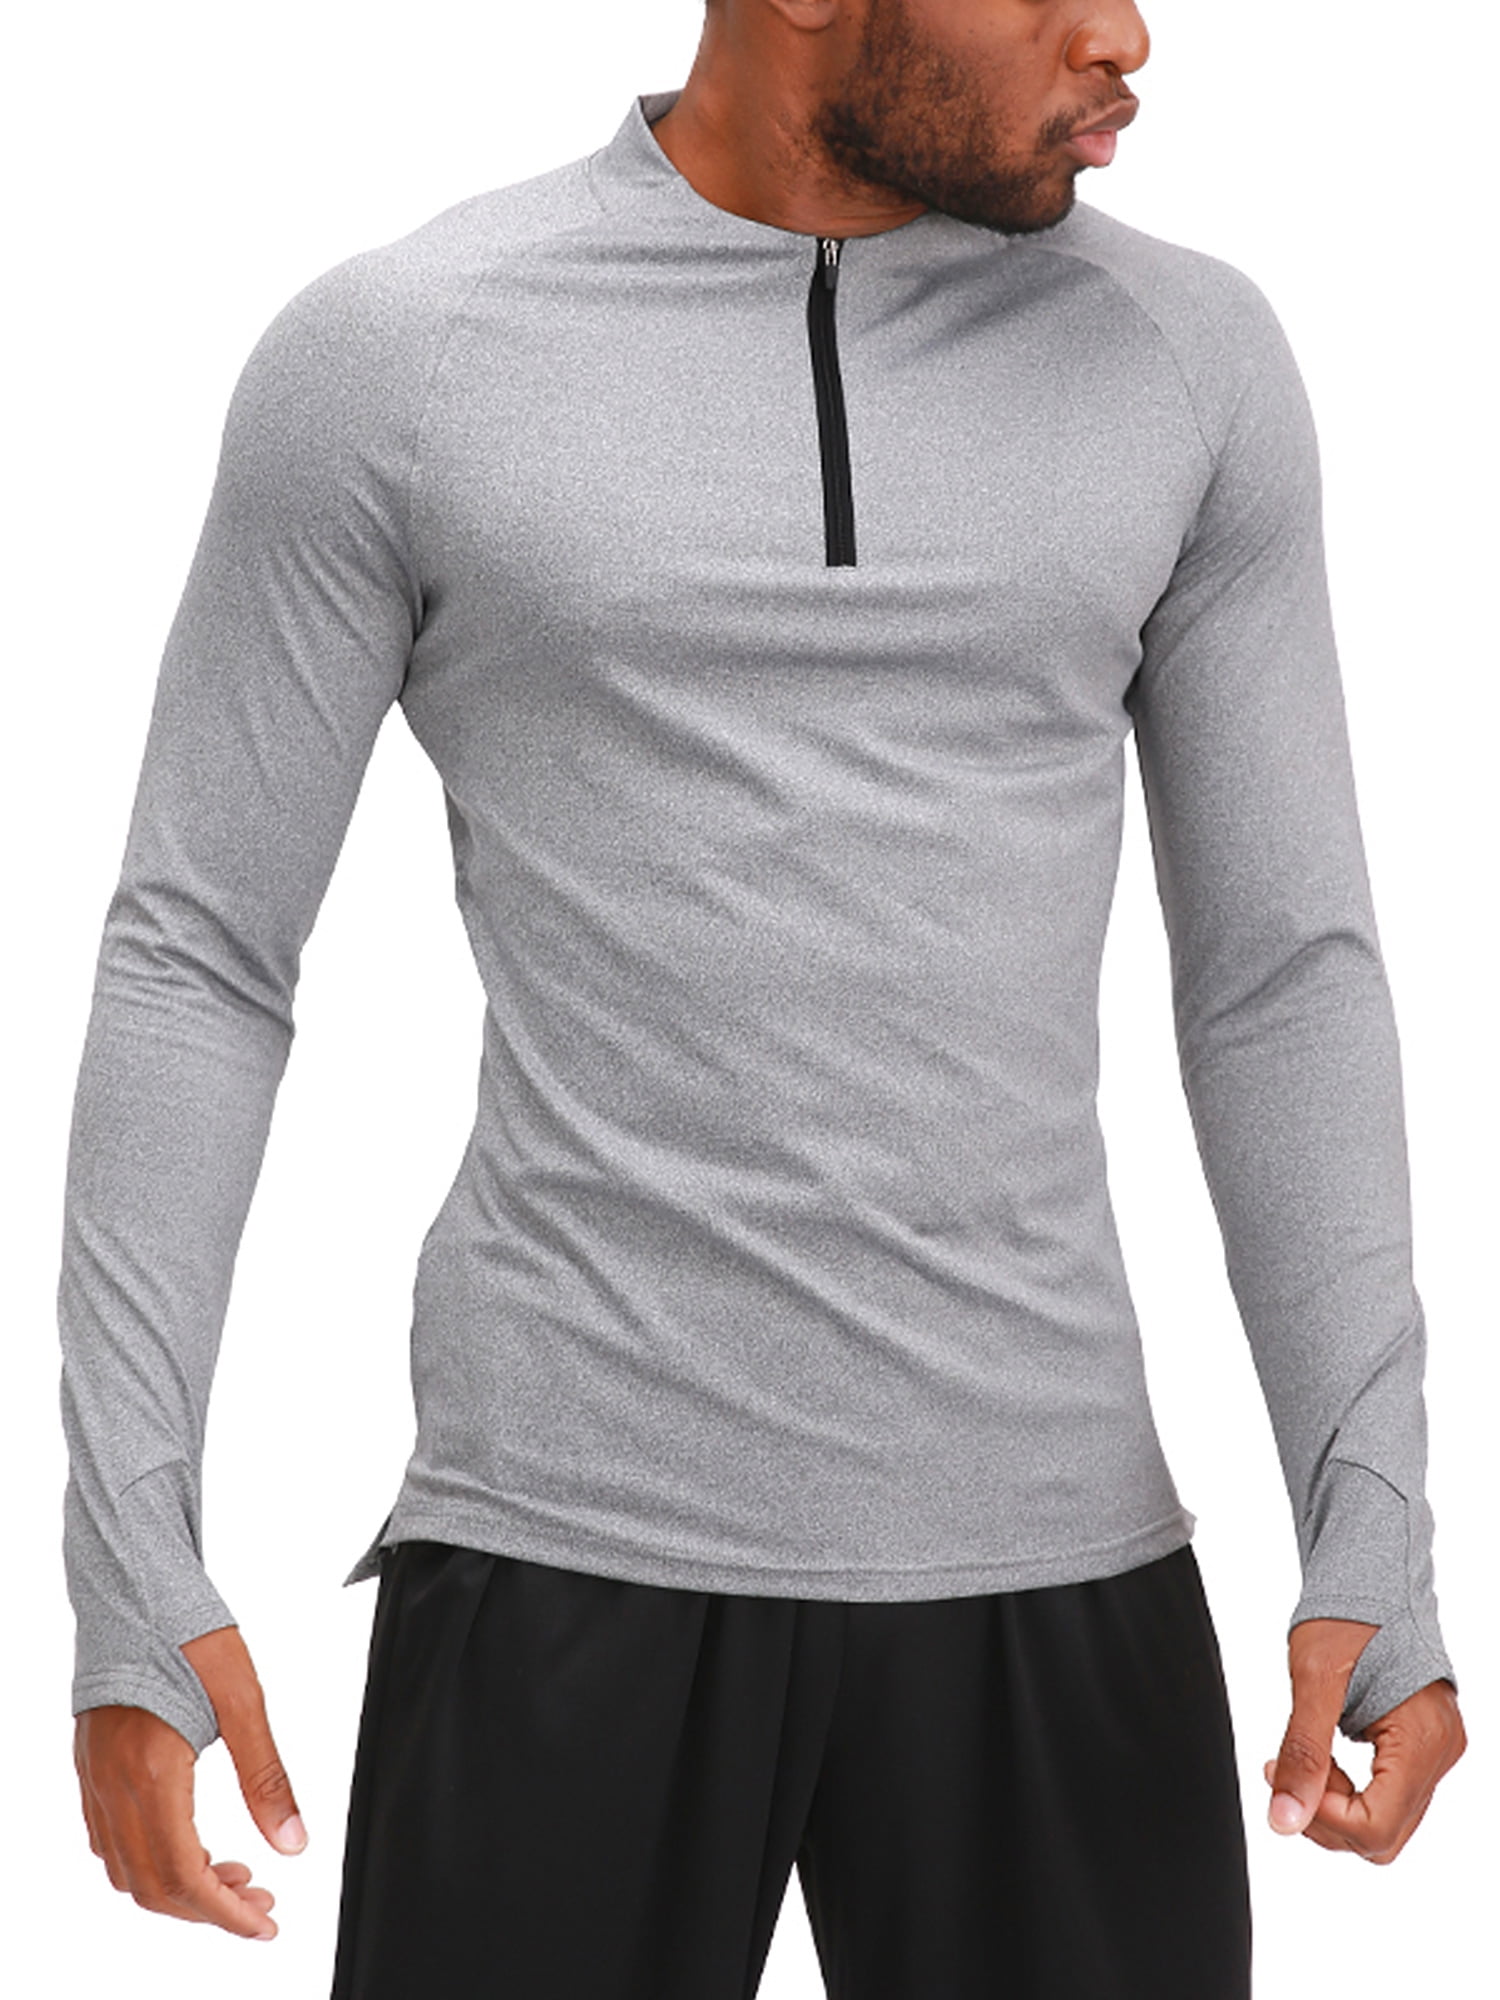 Men's Compression Thermal Shirt 1/4 Zip Up Mock Neck Gym Base Layer Top Dry fit 